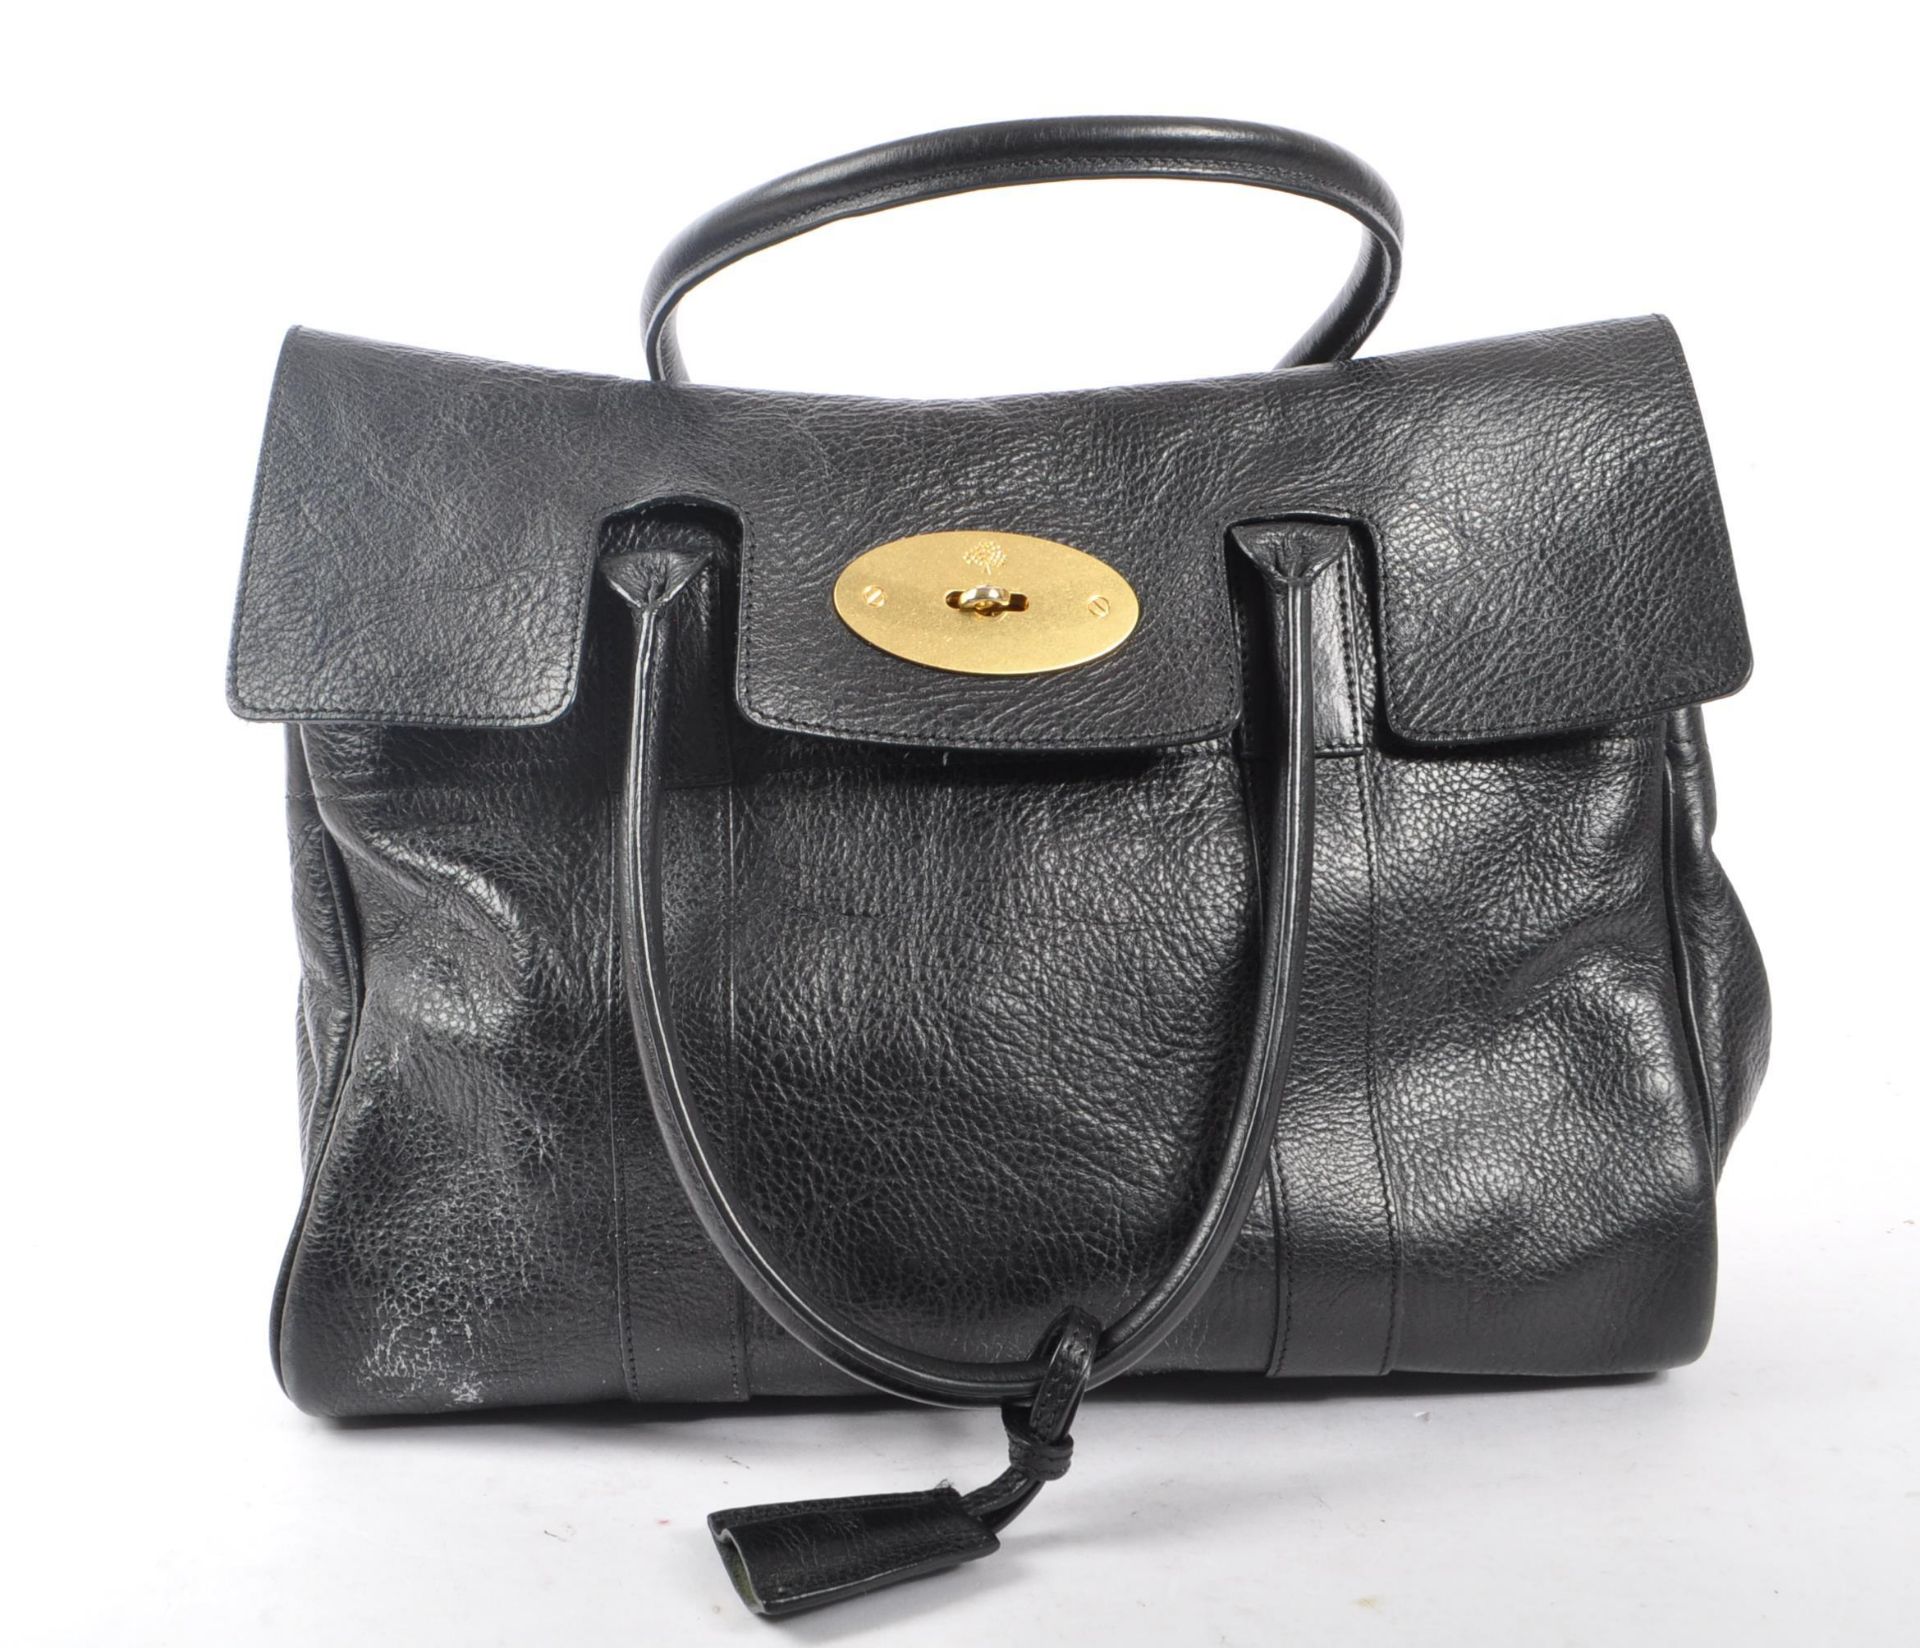 MULBERRY - LONDON - CONTEMPORARY LEATHER DESIGNER BAG